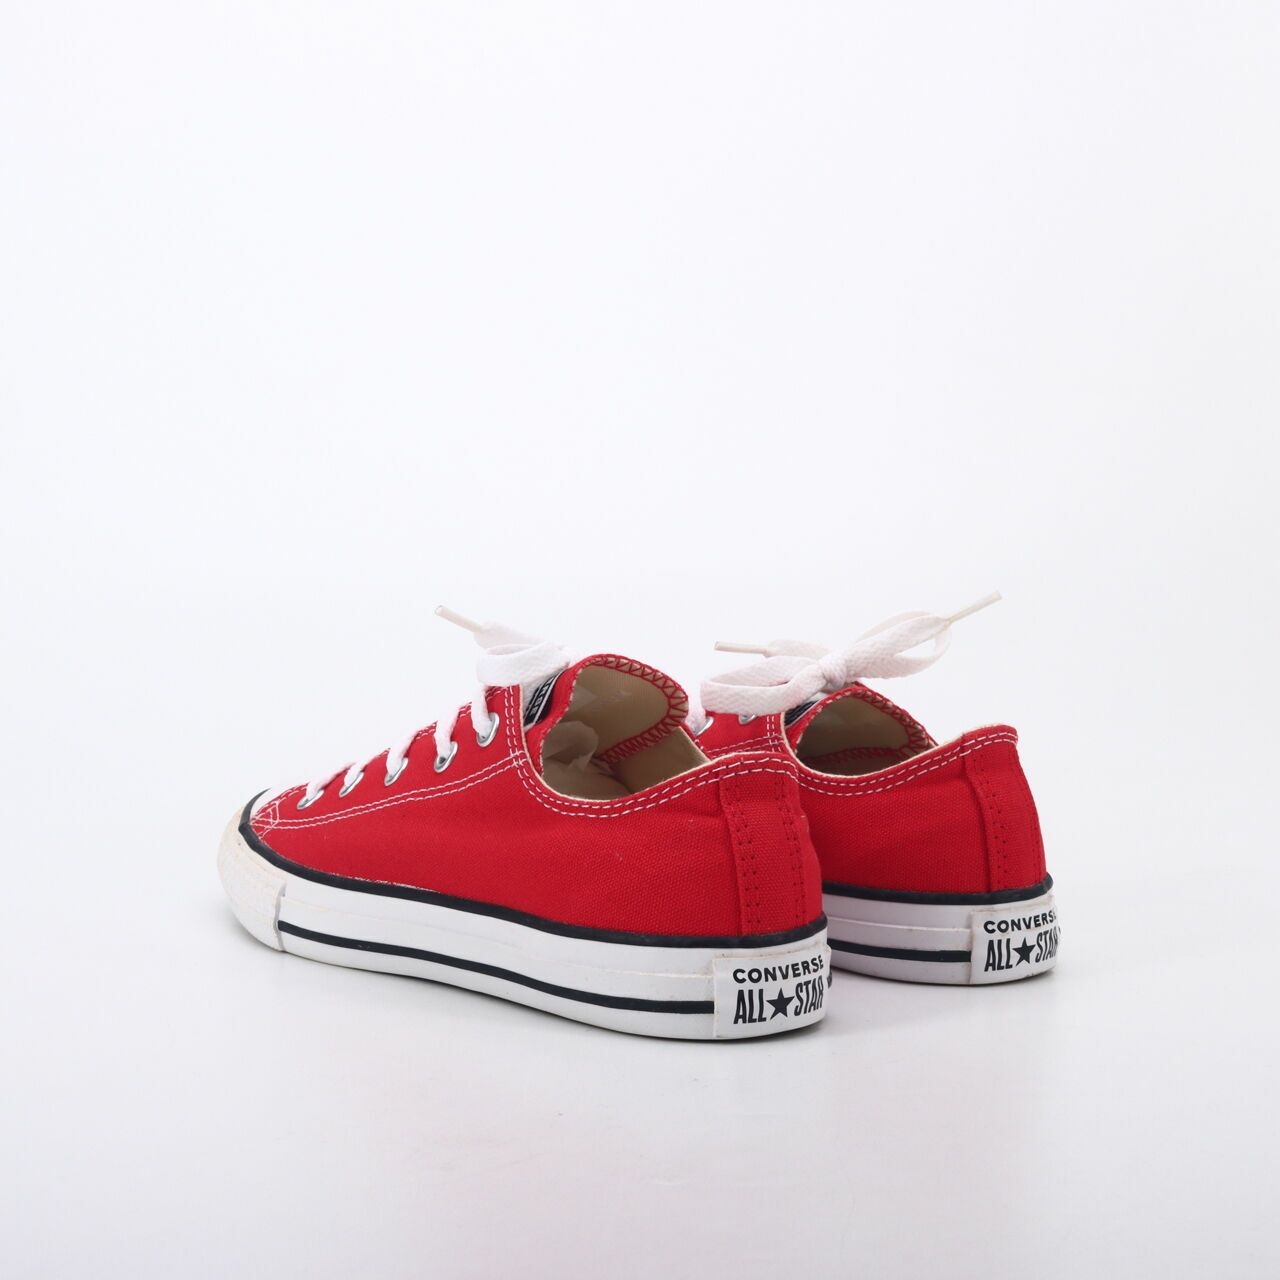 Converse Chuck Taylor All Star OX Red White Canvas